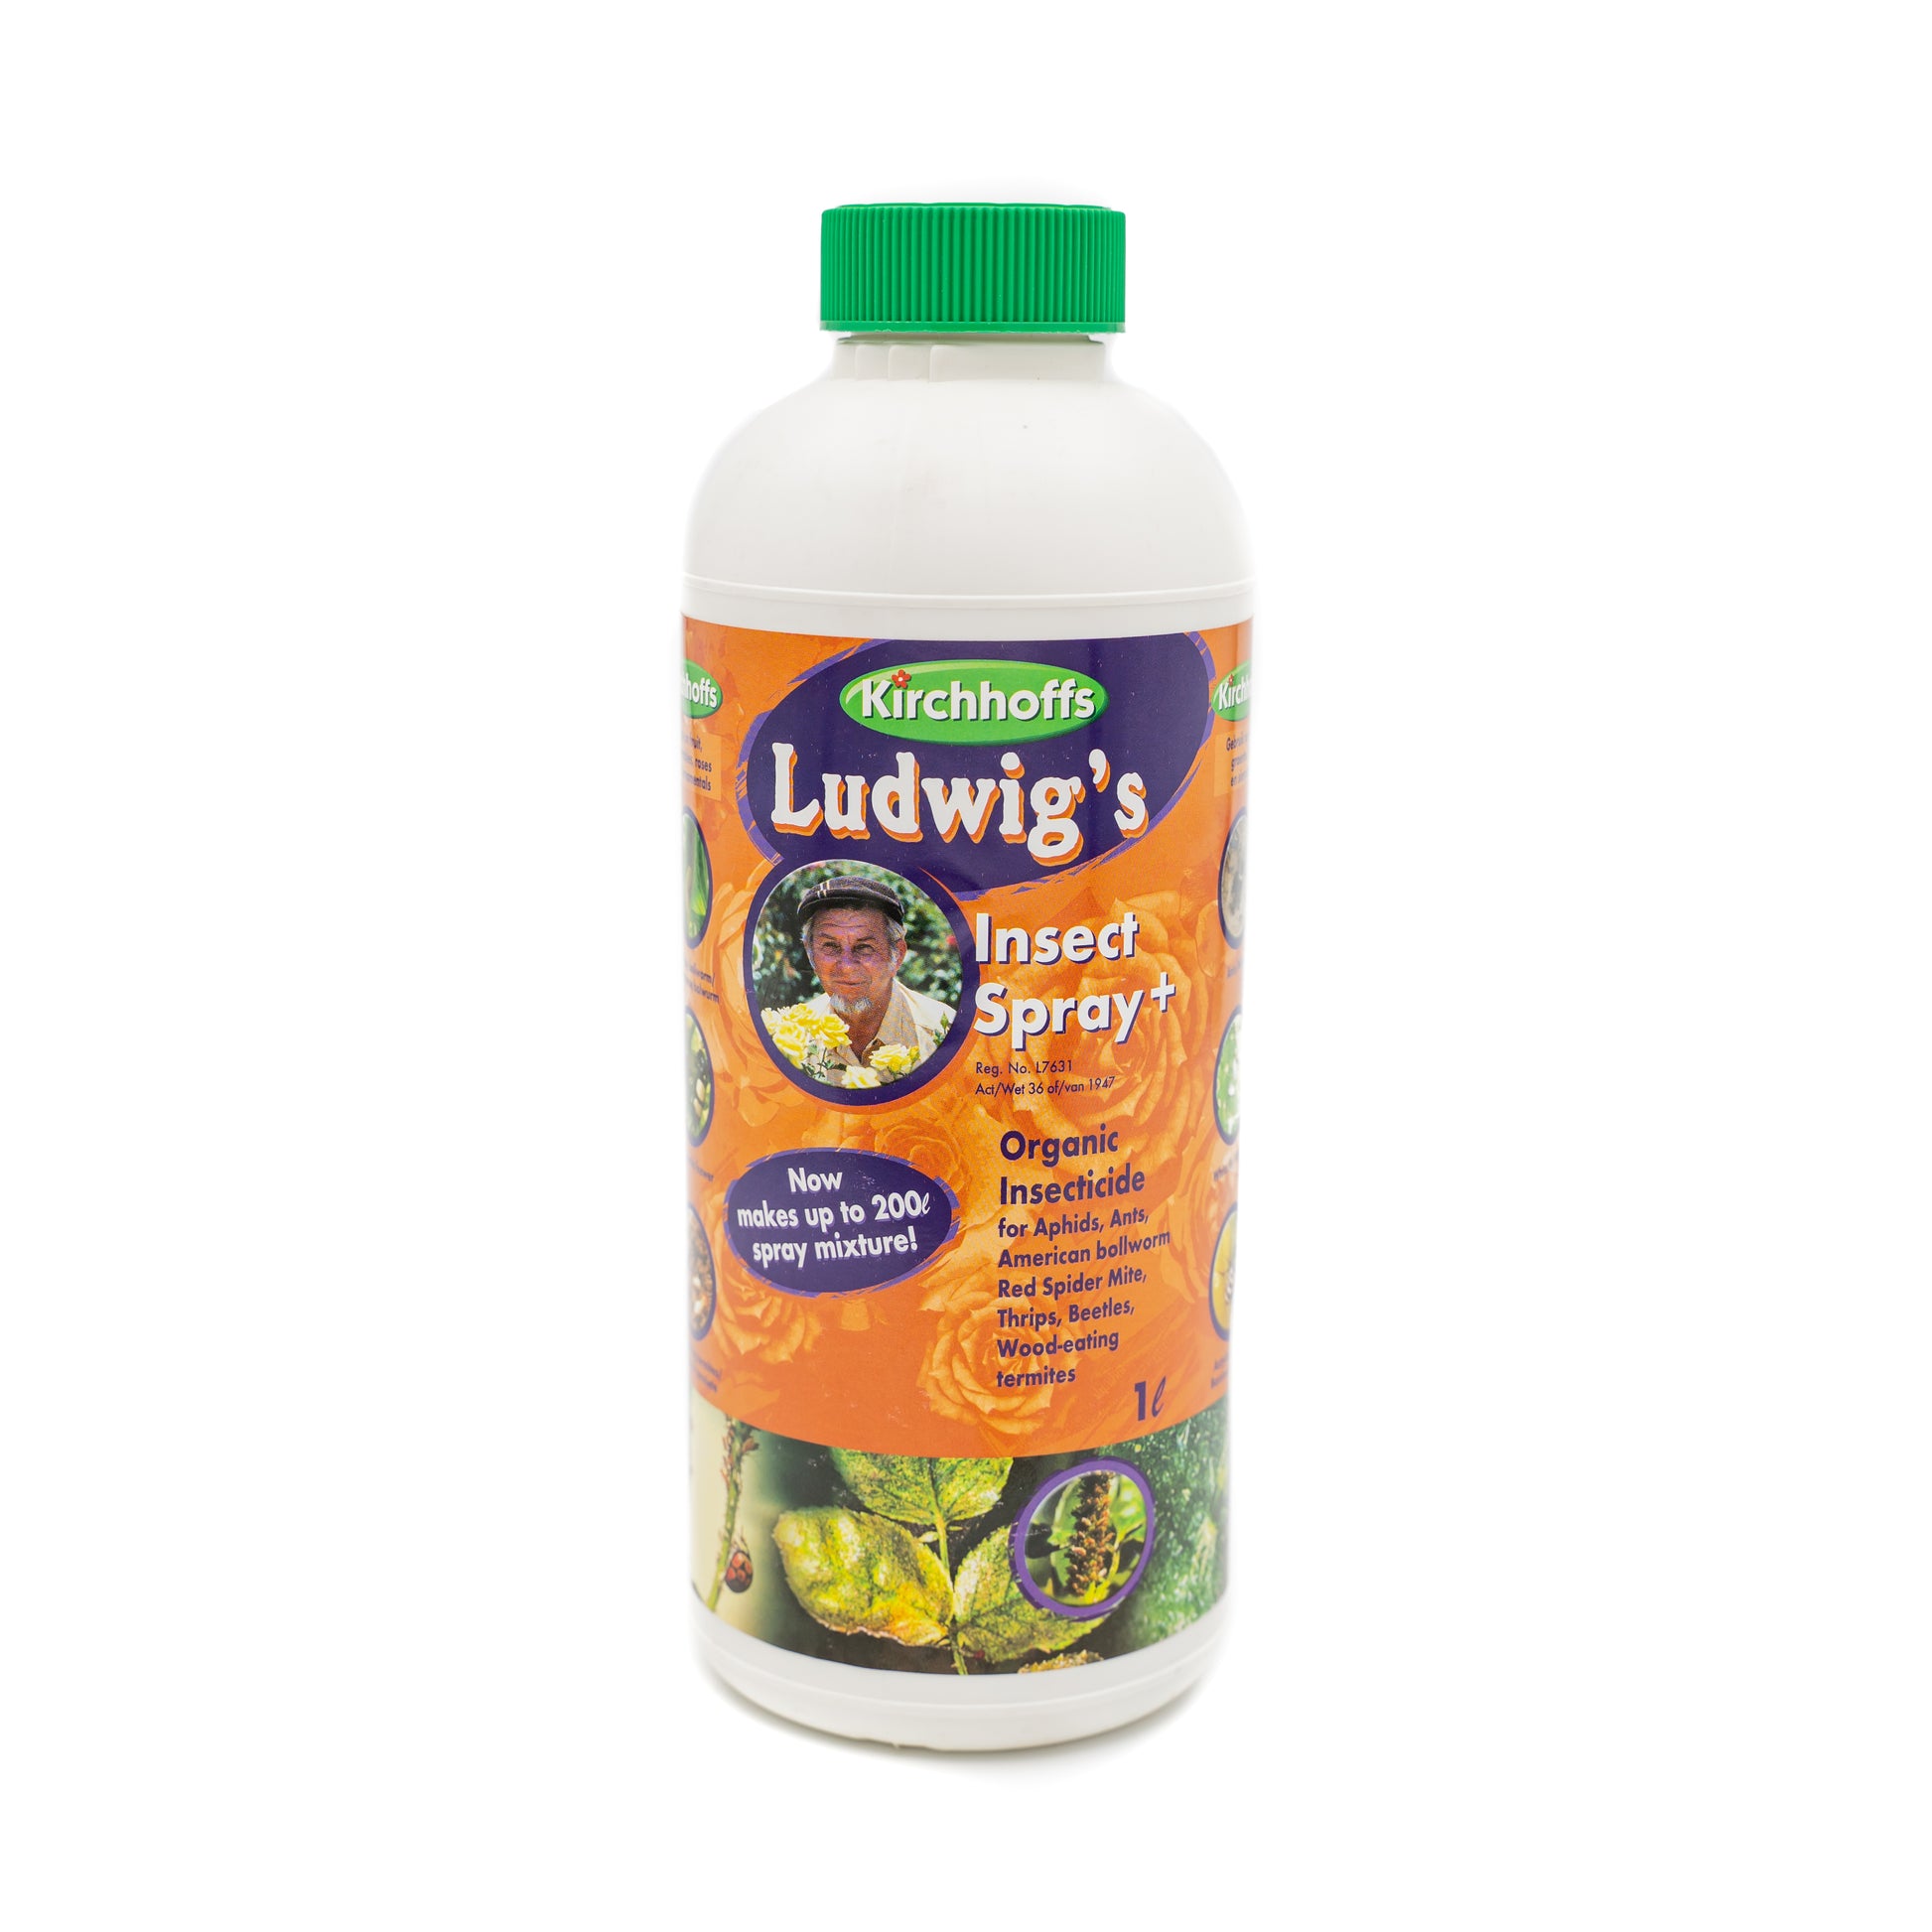 Ludwig's Insect Spray Plus Insecticide bottle